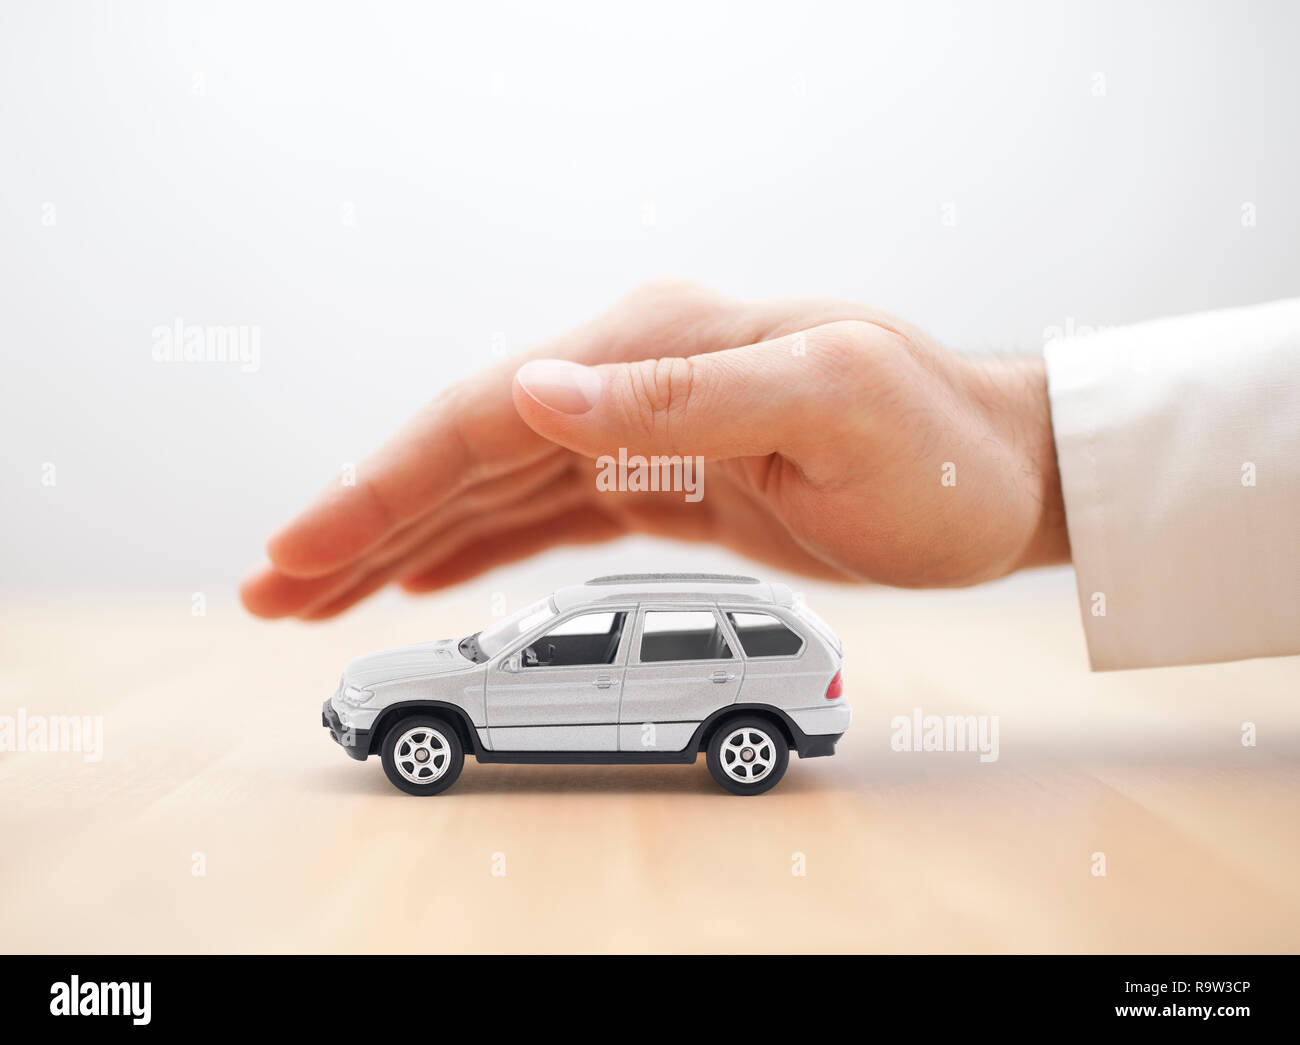 Car insurance. Small silver car covered by hand. Stock Photo